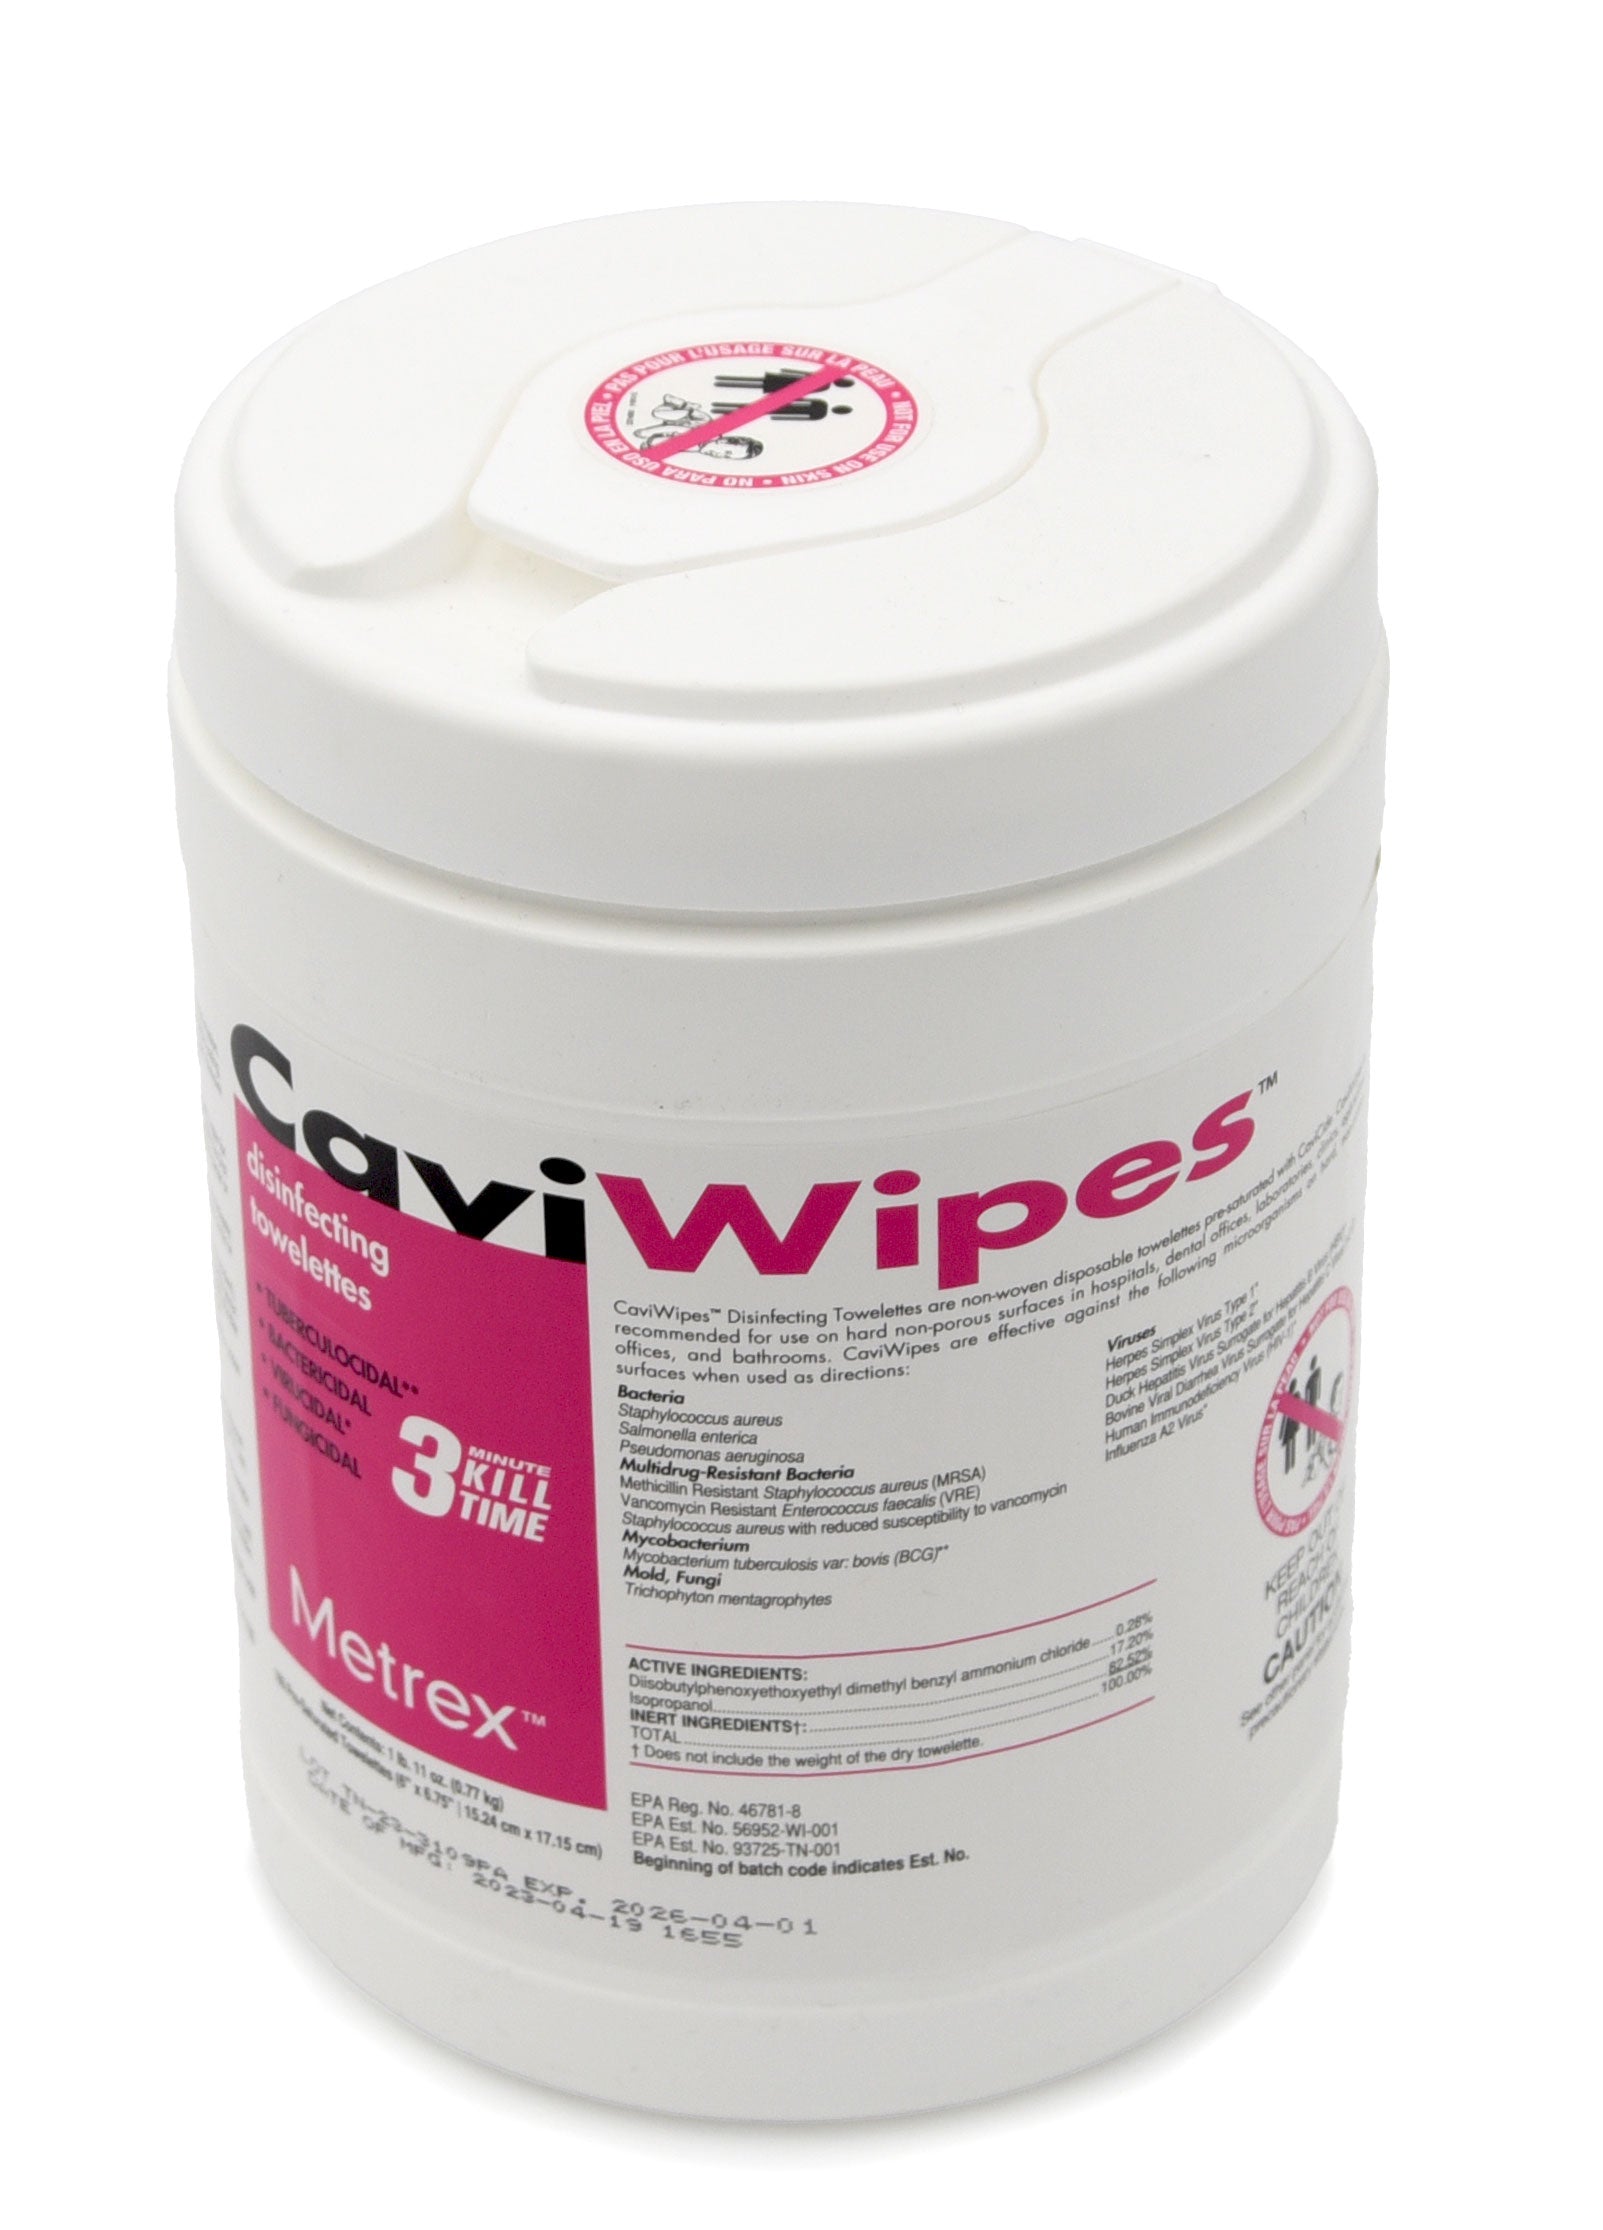 CaviWipes Disinfecting Wipes